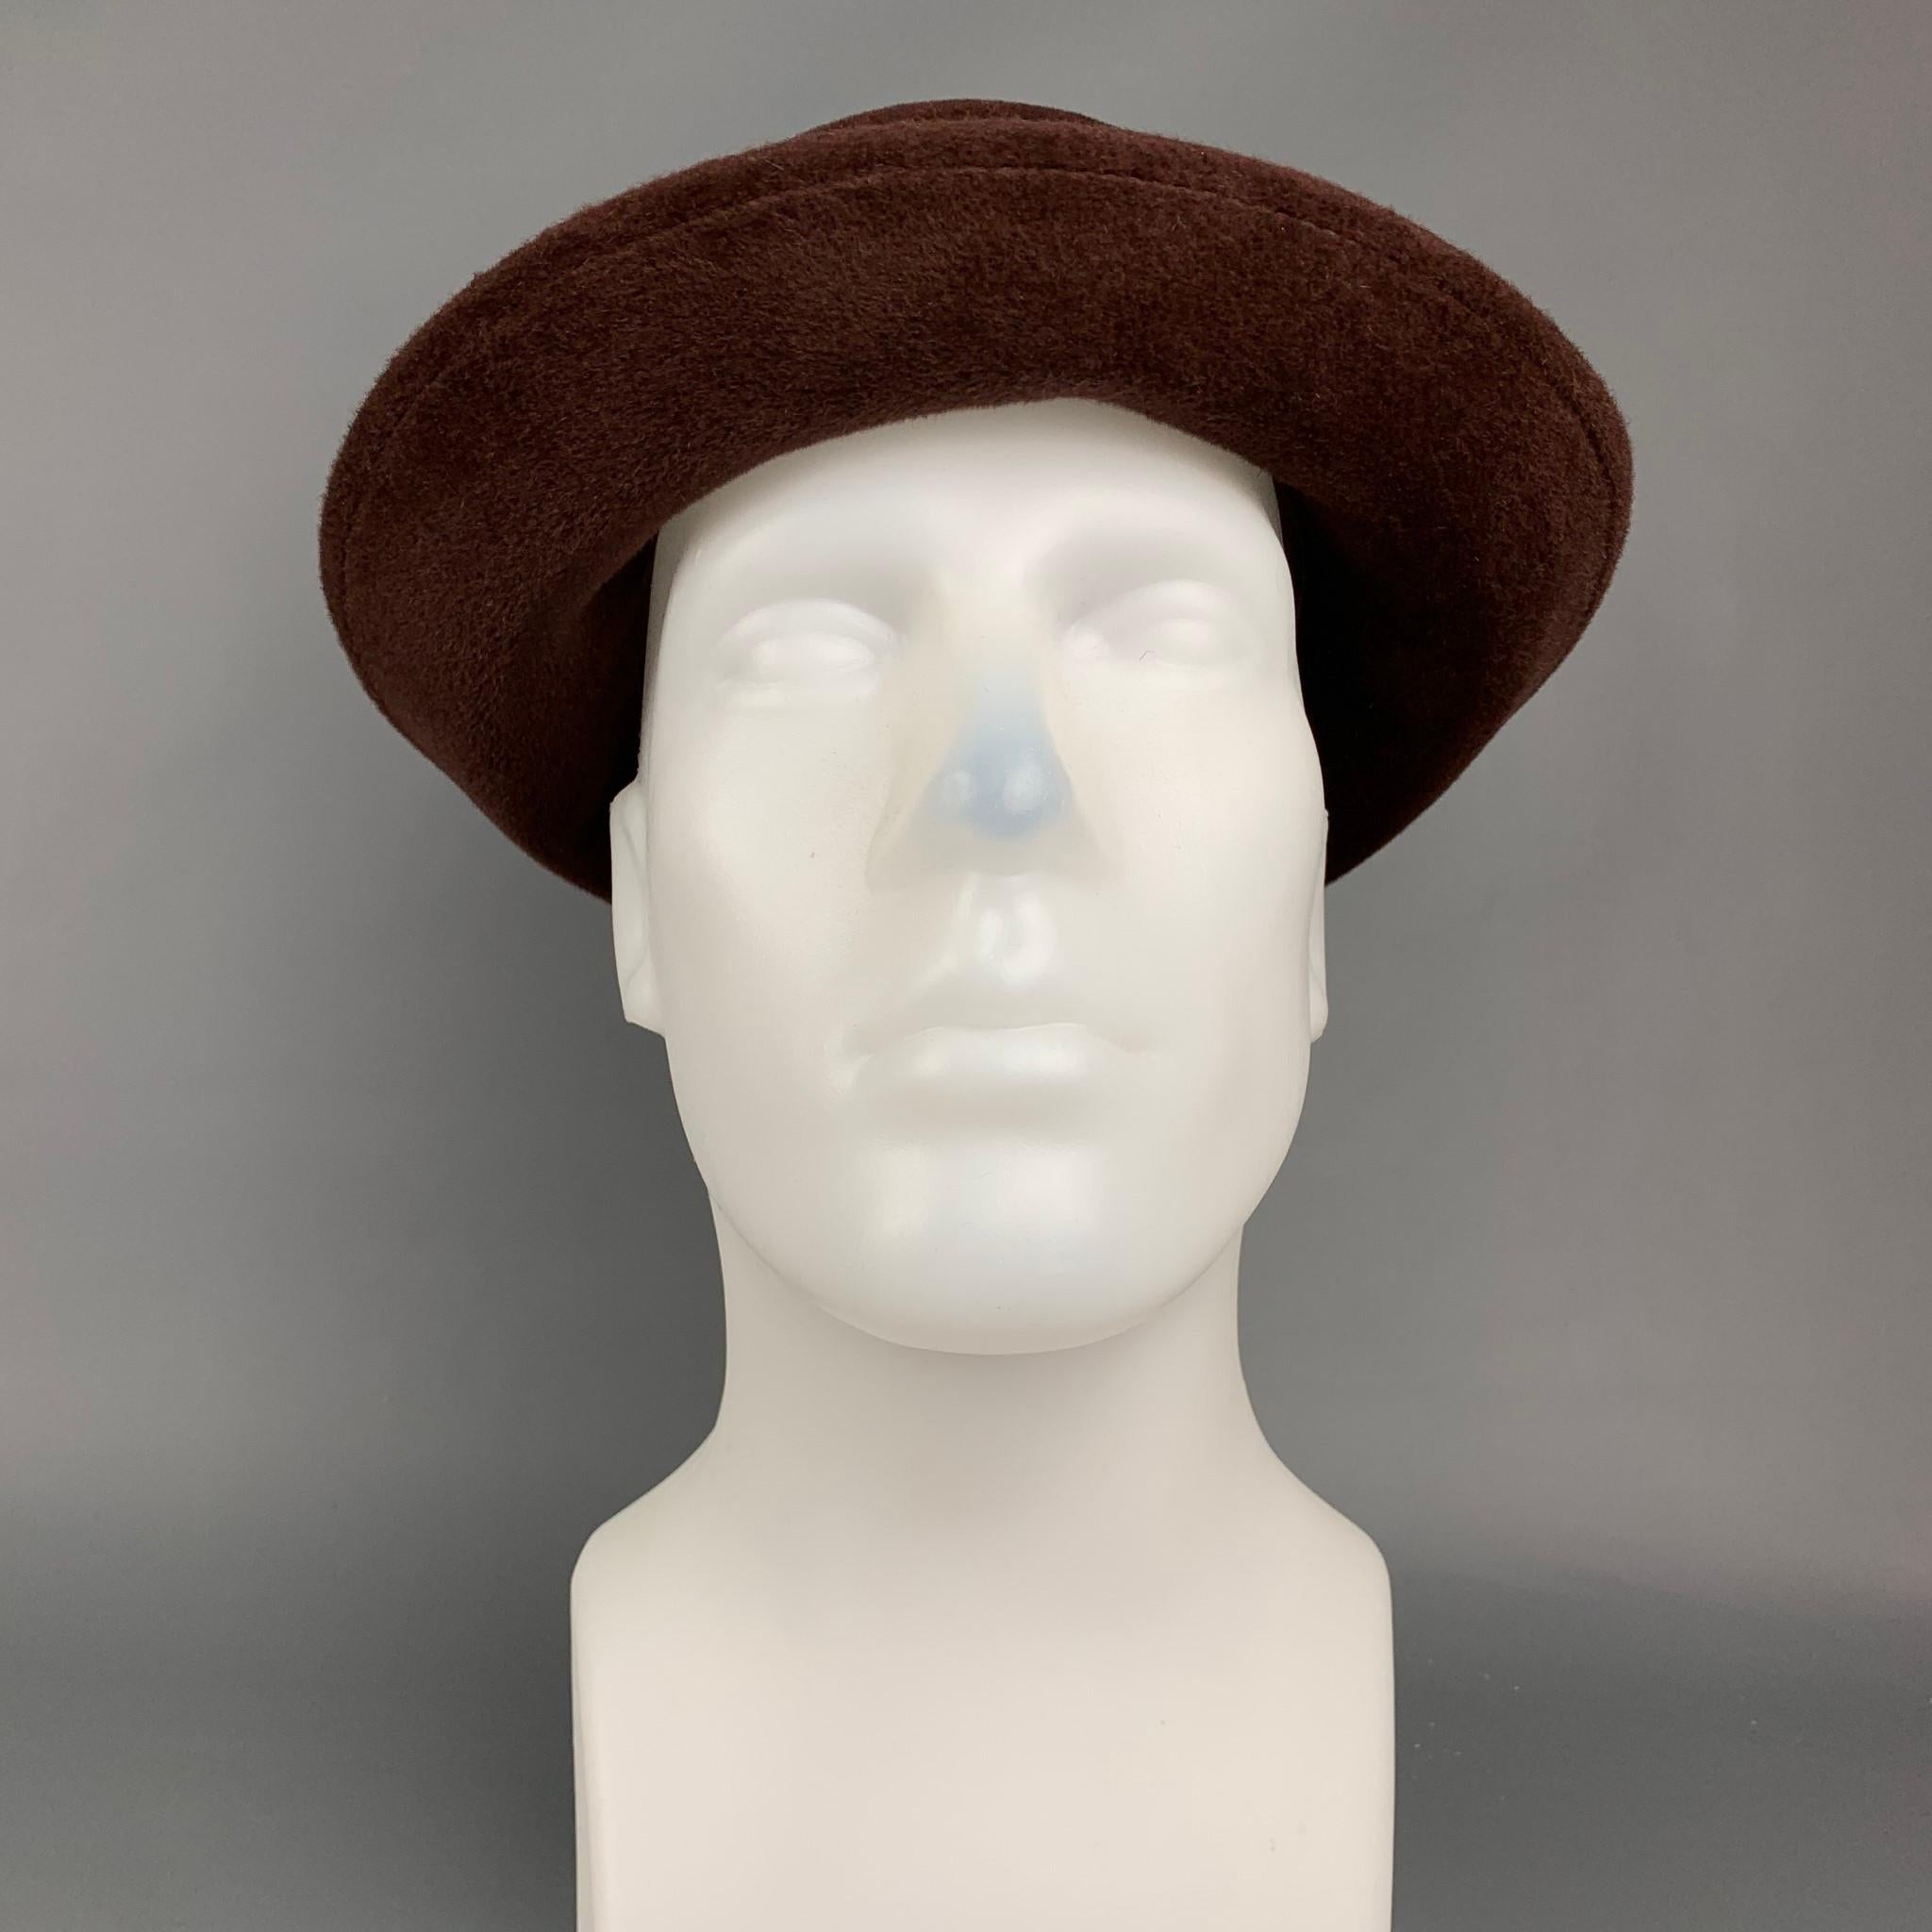 HELEN KAMINSKI hat comes in a brown felt material featuring a round shape and a black elastic strap detail. Includes box. 

Very Good Pre-Owned Condition.
Marked: M

Measurements:

Opening: 25 in.
Brim: 2 in.
Height: 2.5 in. 